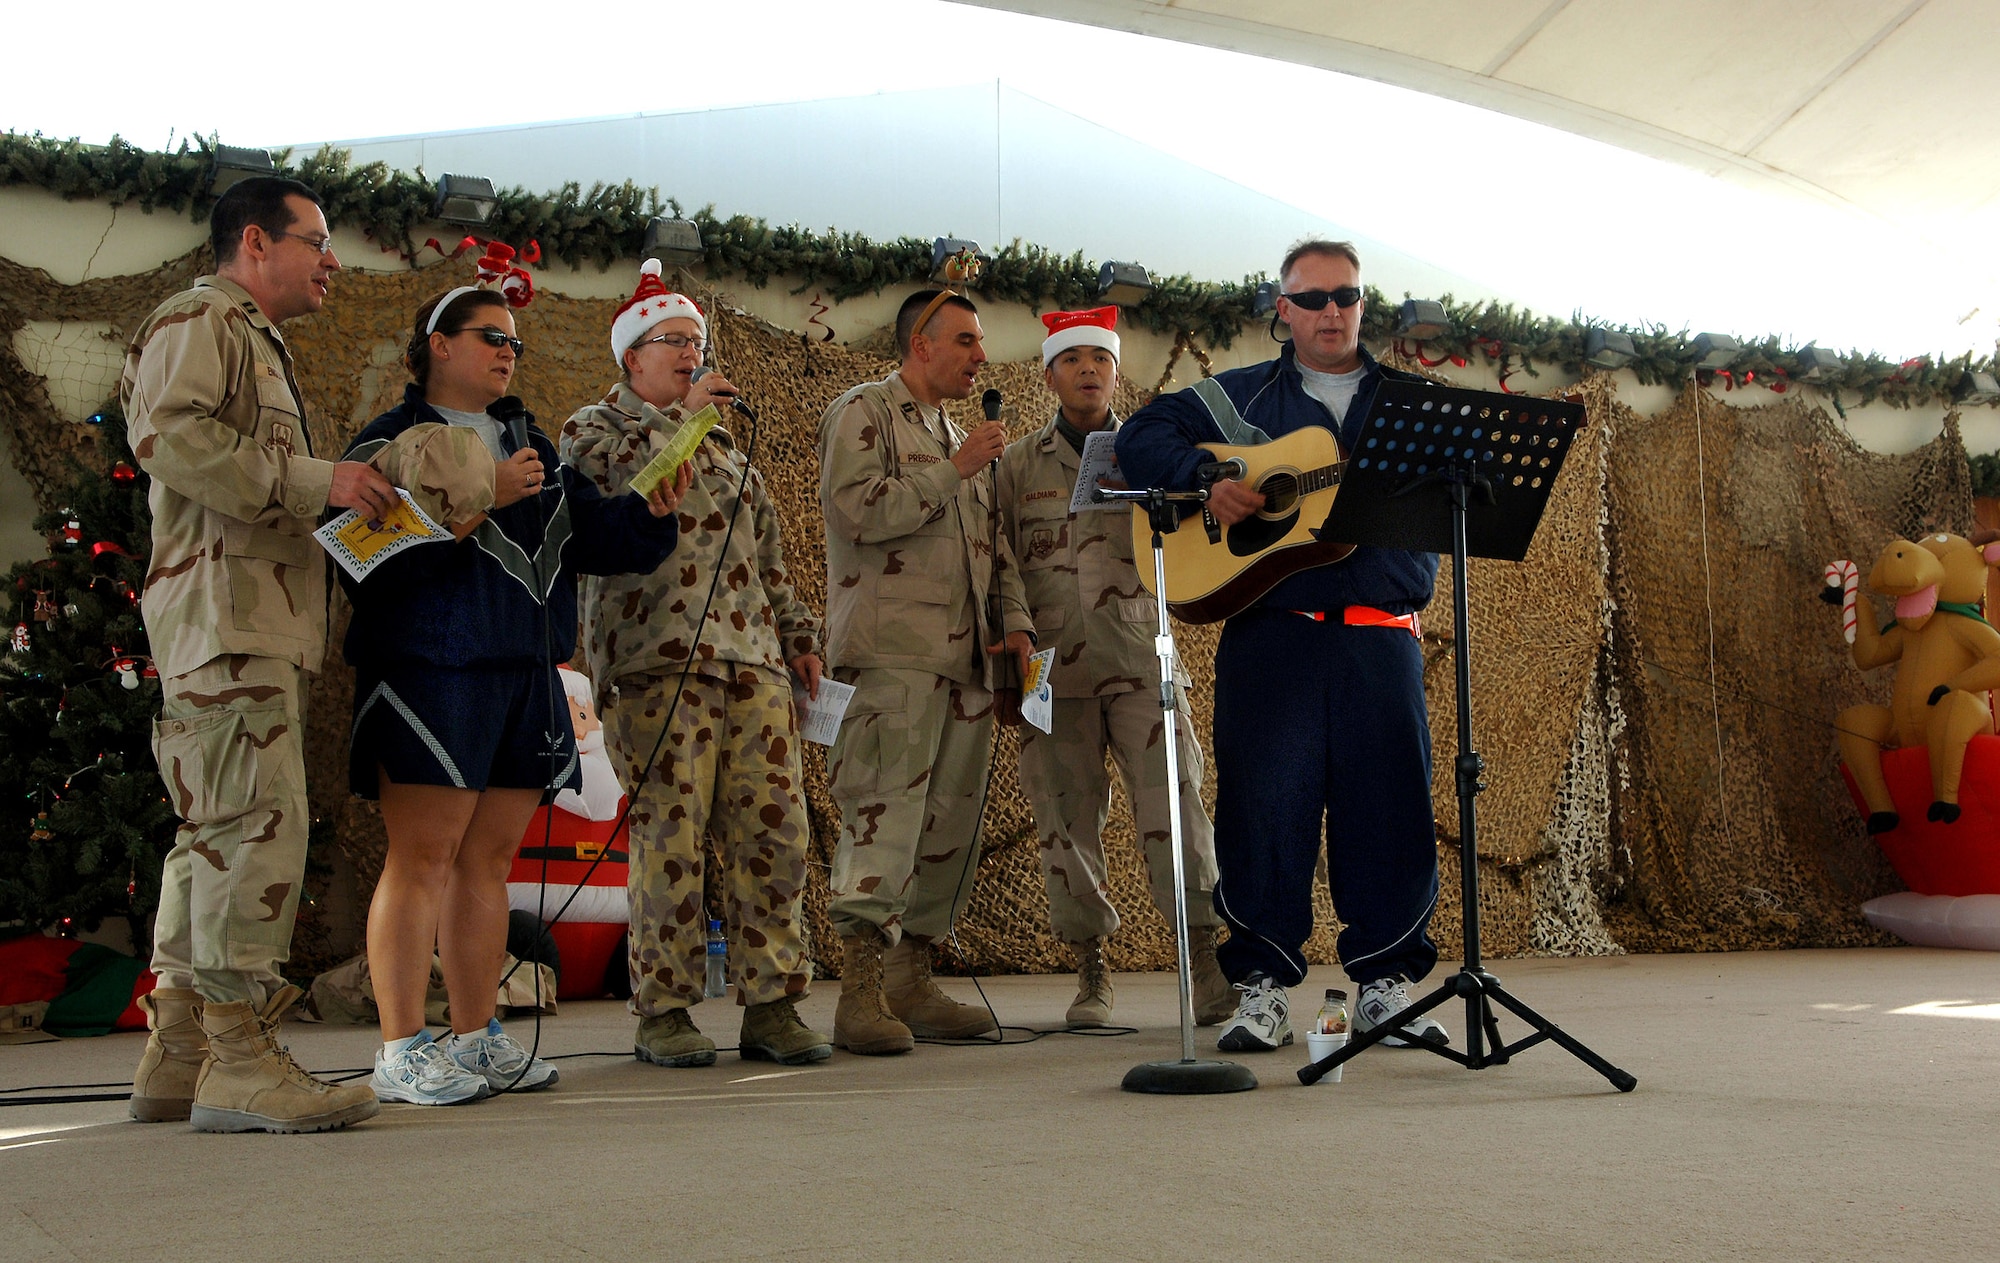 Chaplain (Capt.) Jason English (from left), Maj. Tracey Birri, Royal Air Force member Sarah Clark, Capt. Deric Prescott, Capt. Ray Galdiano and Senior Master Sgt. Dan DeMers sing classic holiday songs to a breakfast crowd at Memorial Plaza Dec. 25 at a Southwest Asia air base. (U.S. Air Force photo/Master Sgt. Greg Kunkle) 
